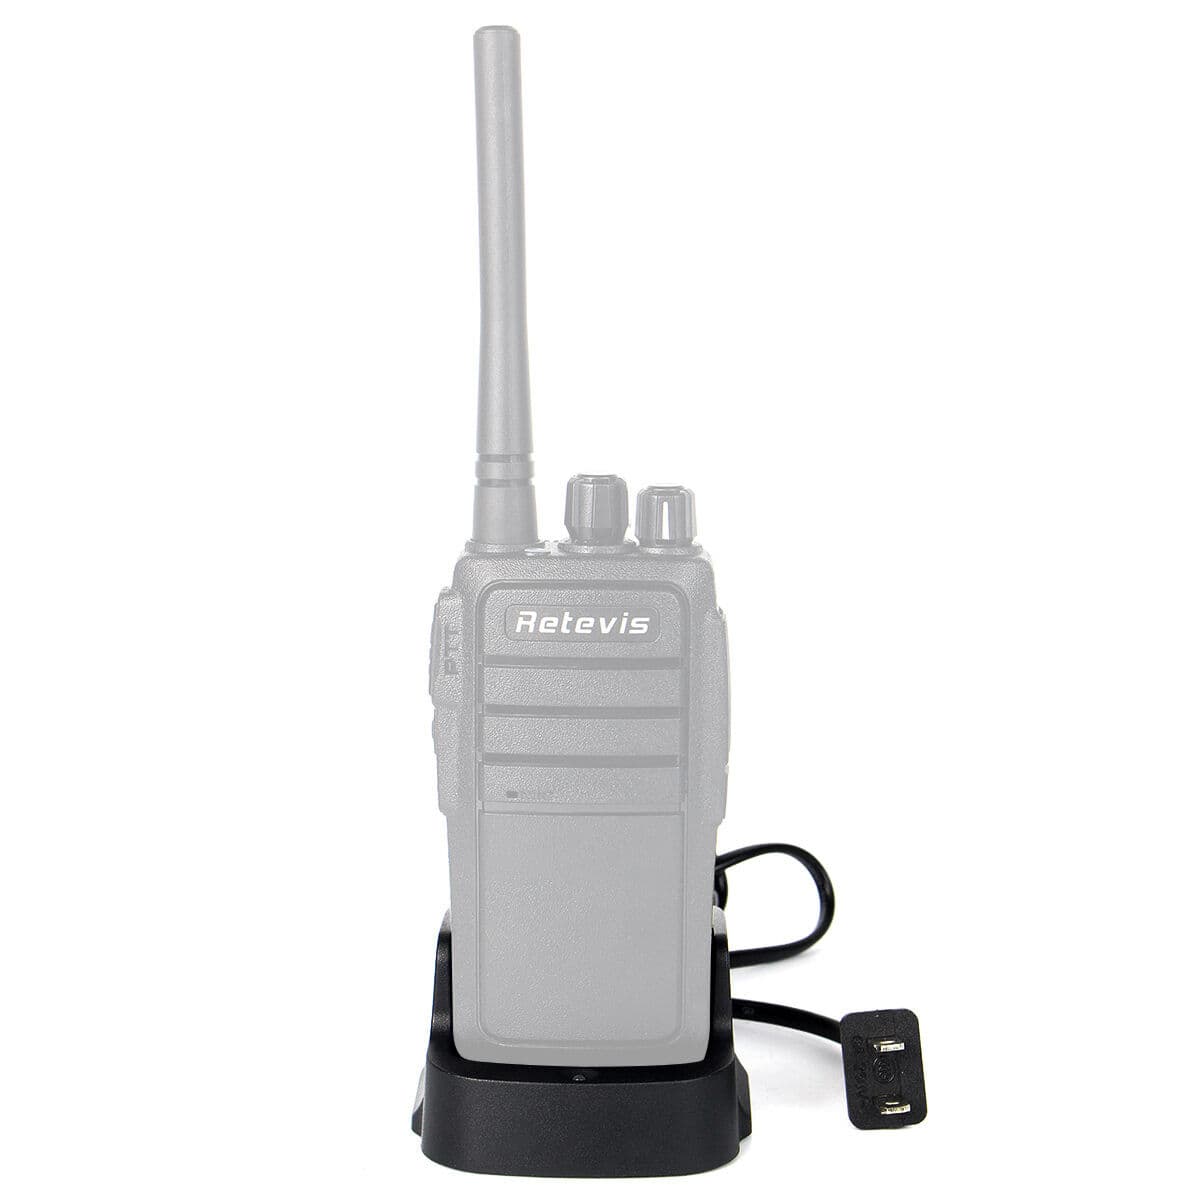 Original Radio Battery Charger Base for Retevis RT21 Walkie Talkie